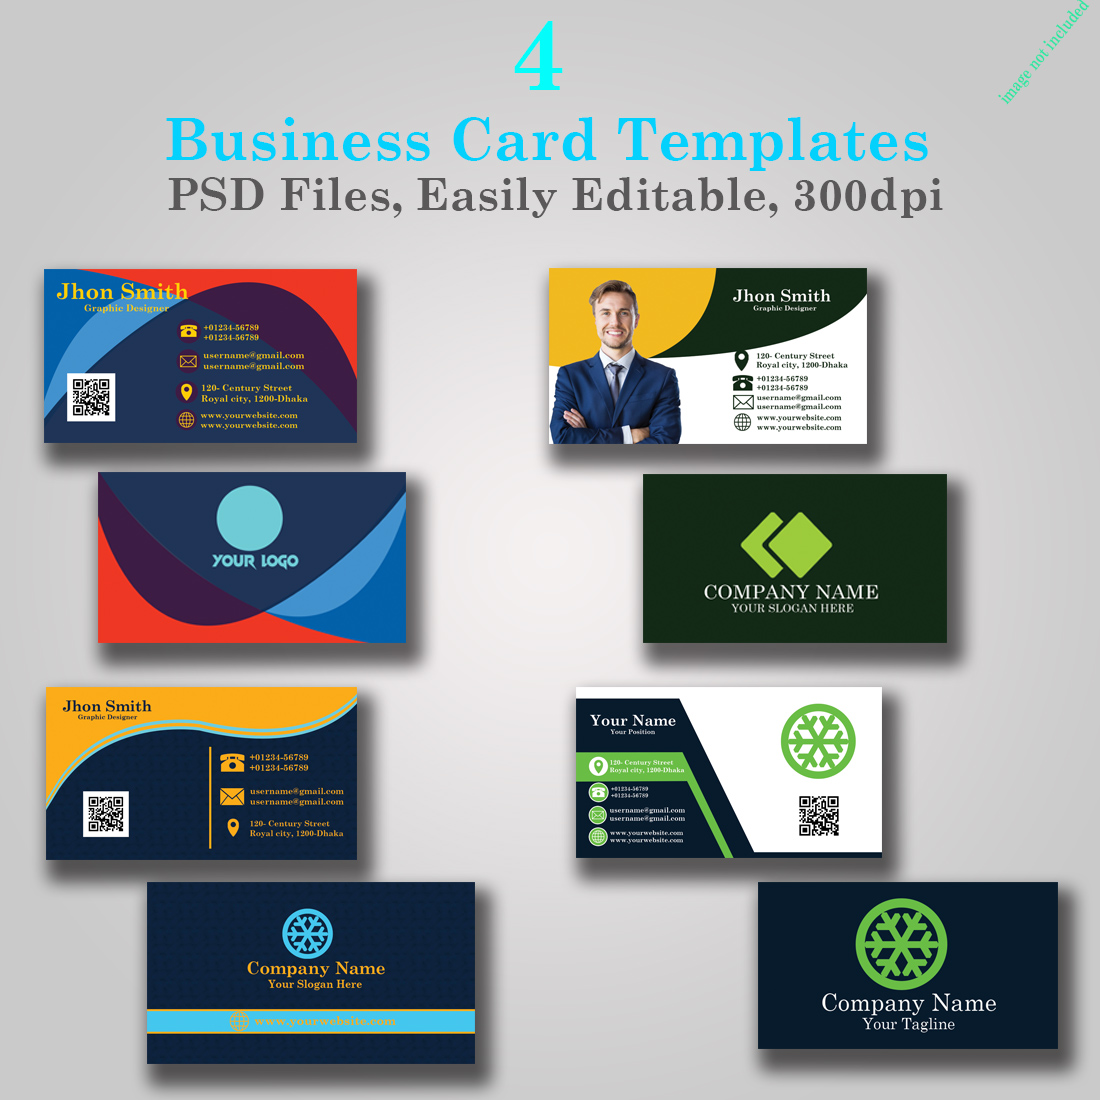 4 Corporate Business Card Template preview image.